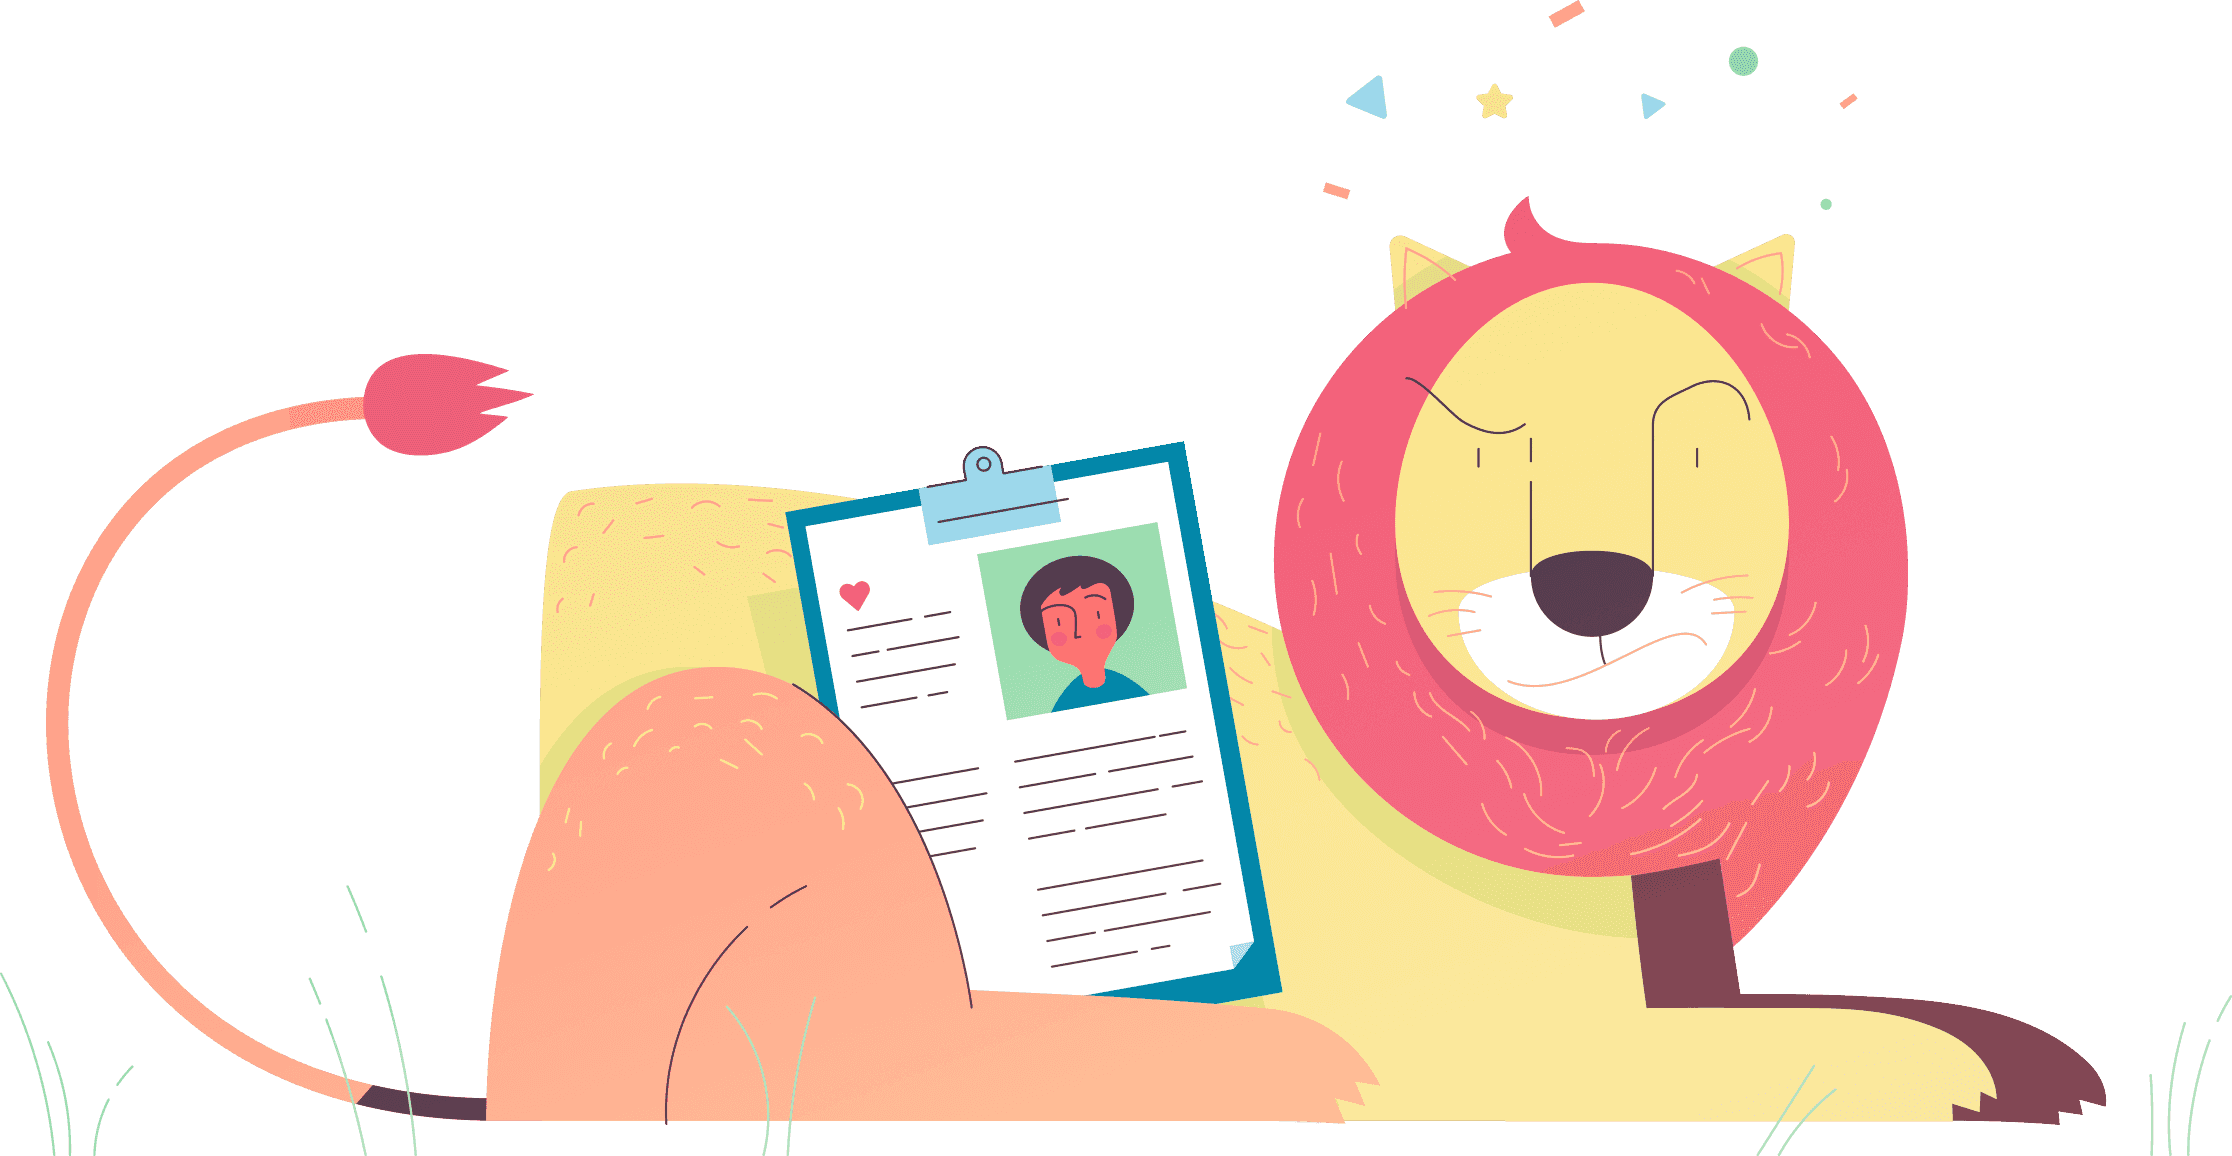 Lion protecting your health records